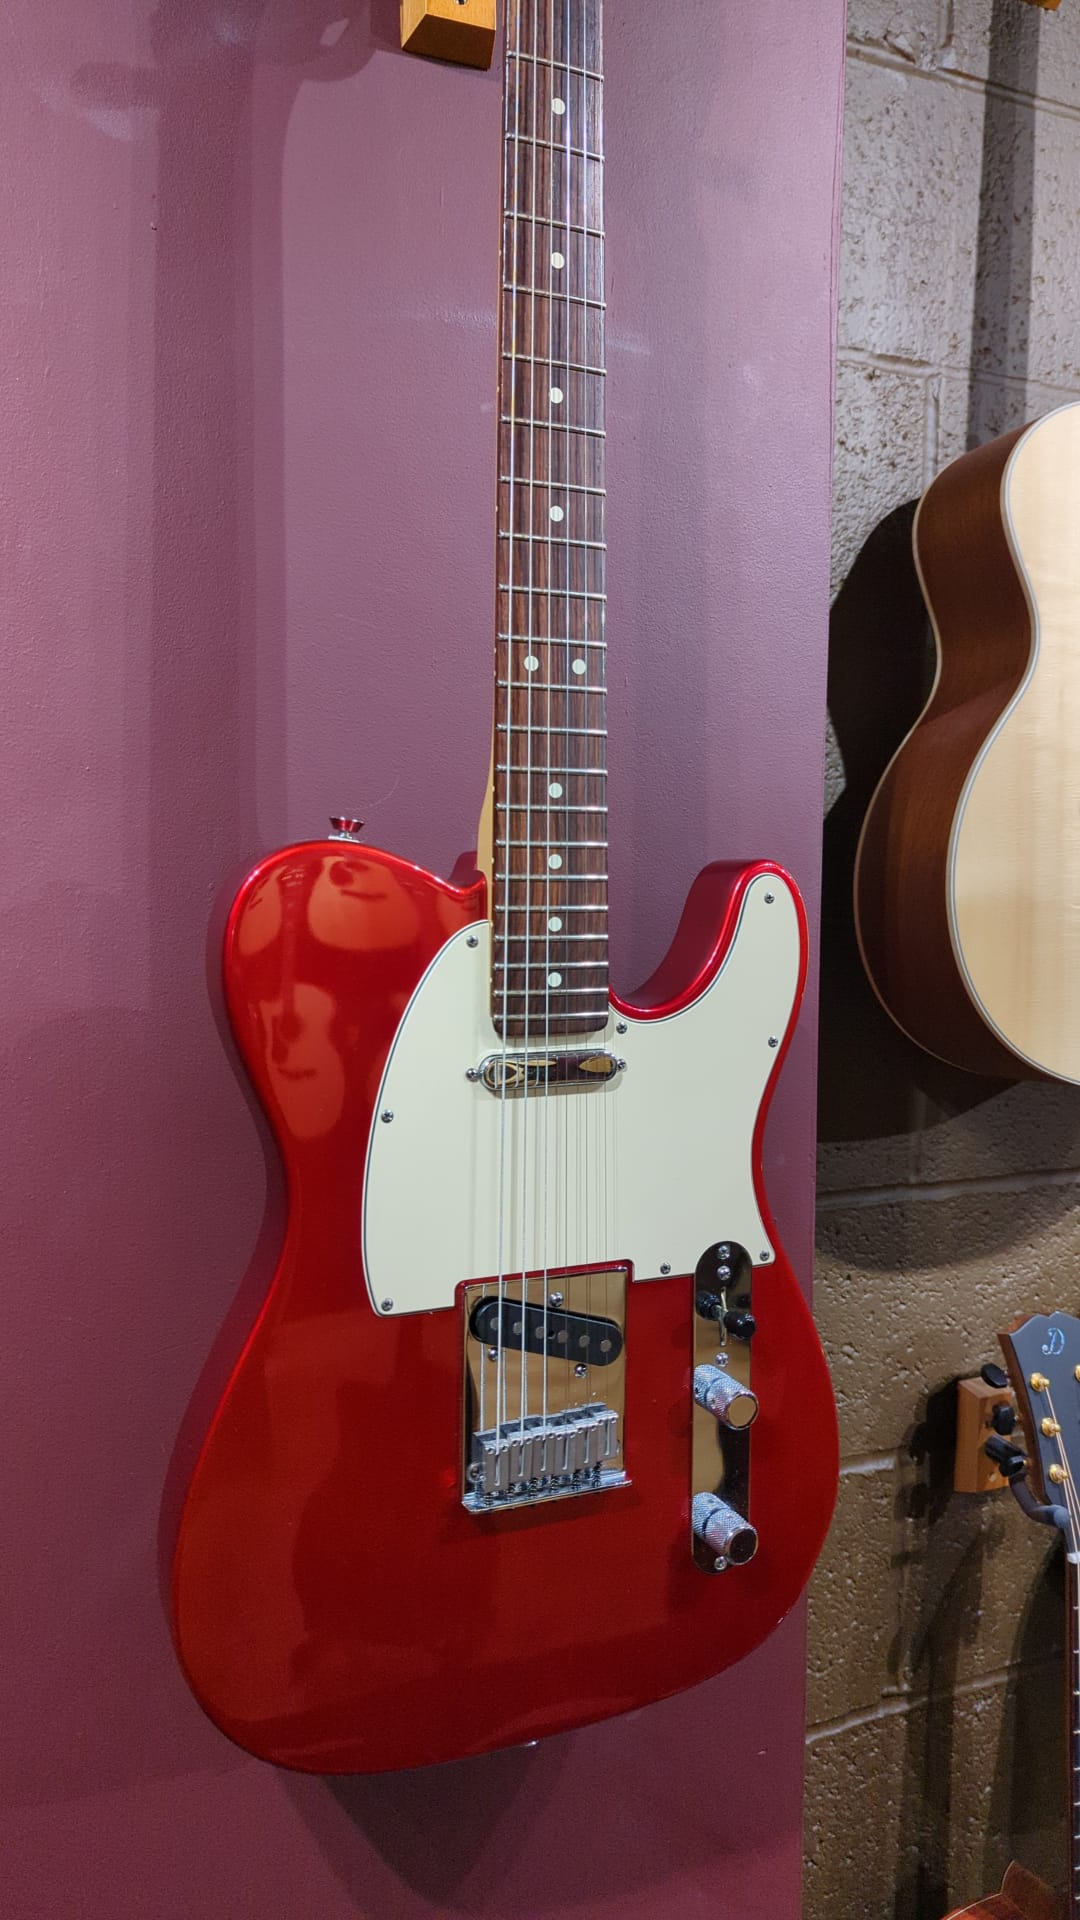 Fender American Telecaster (2000 - 2008) (Used), Electric Guitar for sale at Richards Guitars.